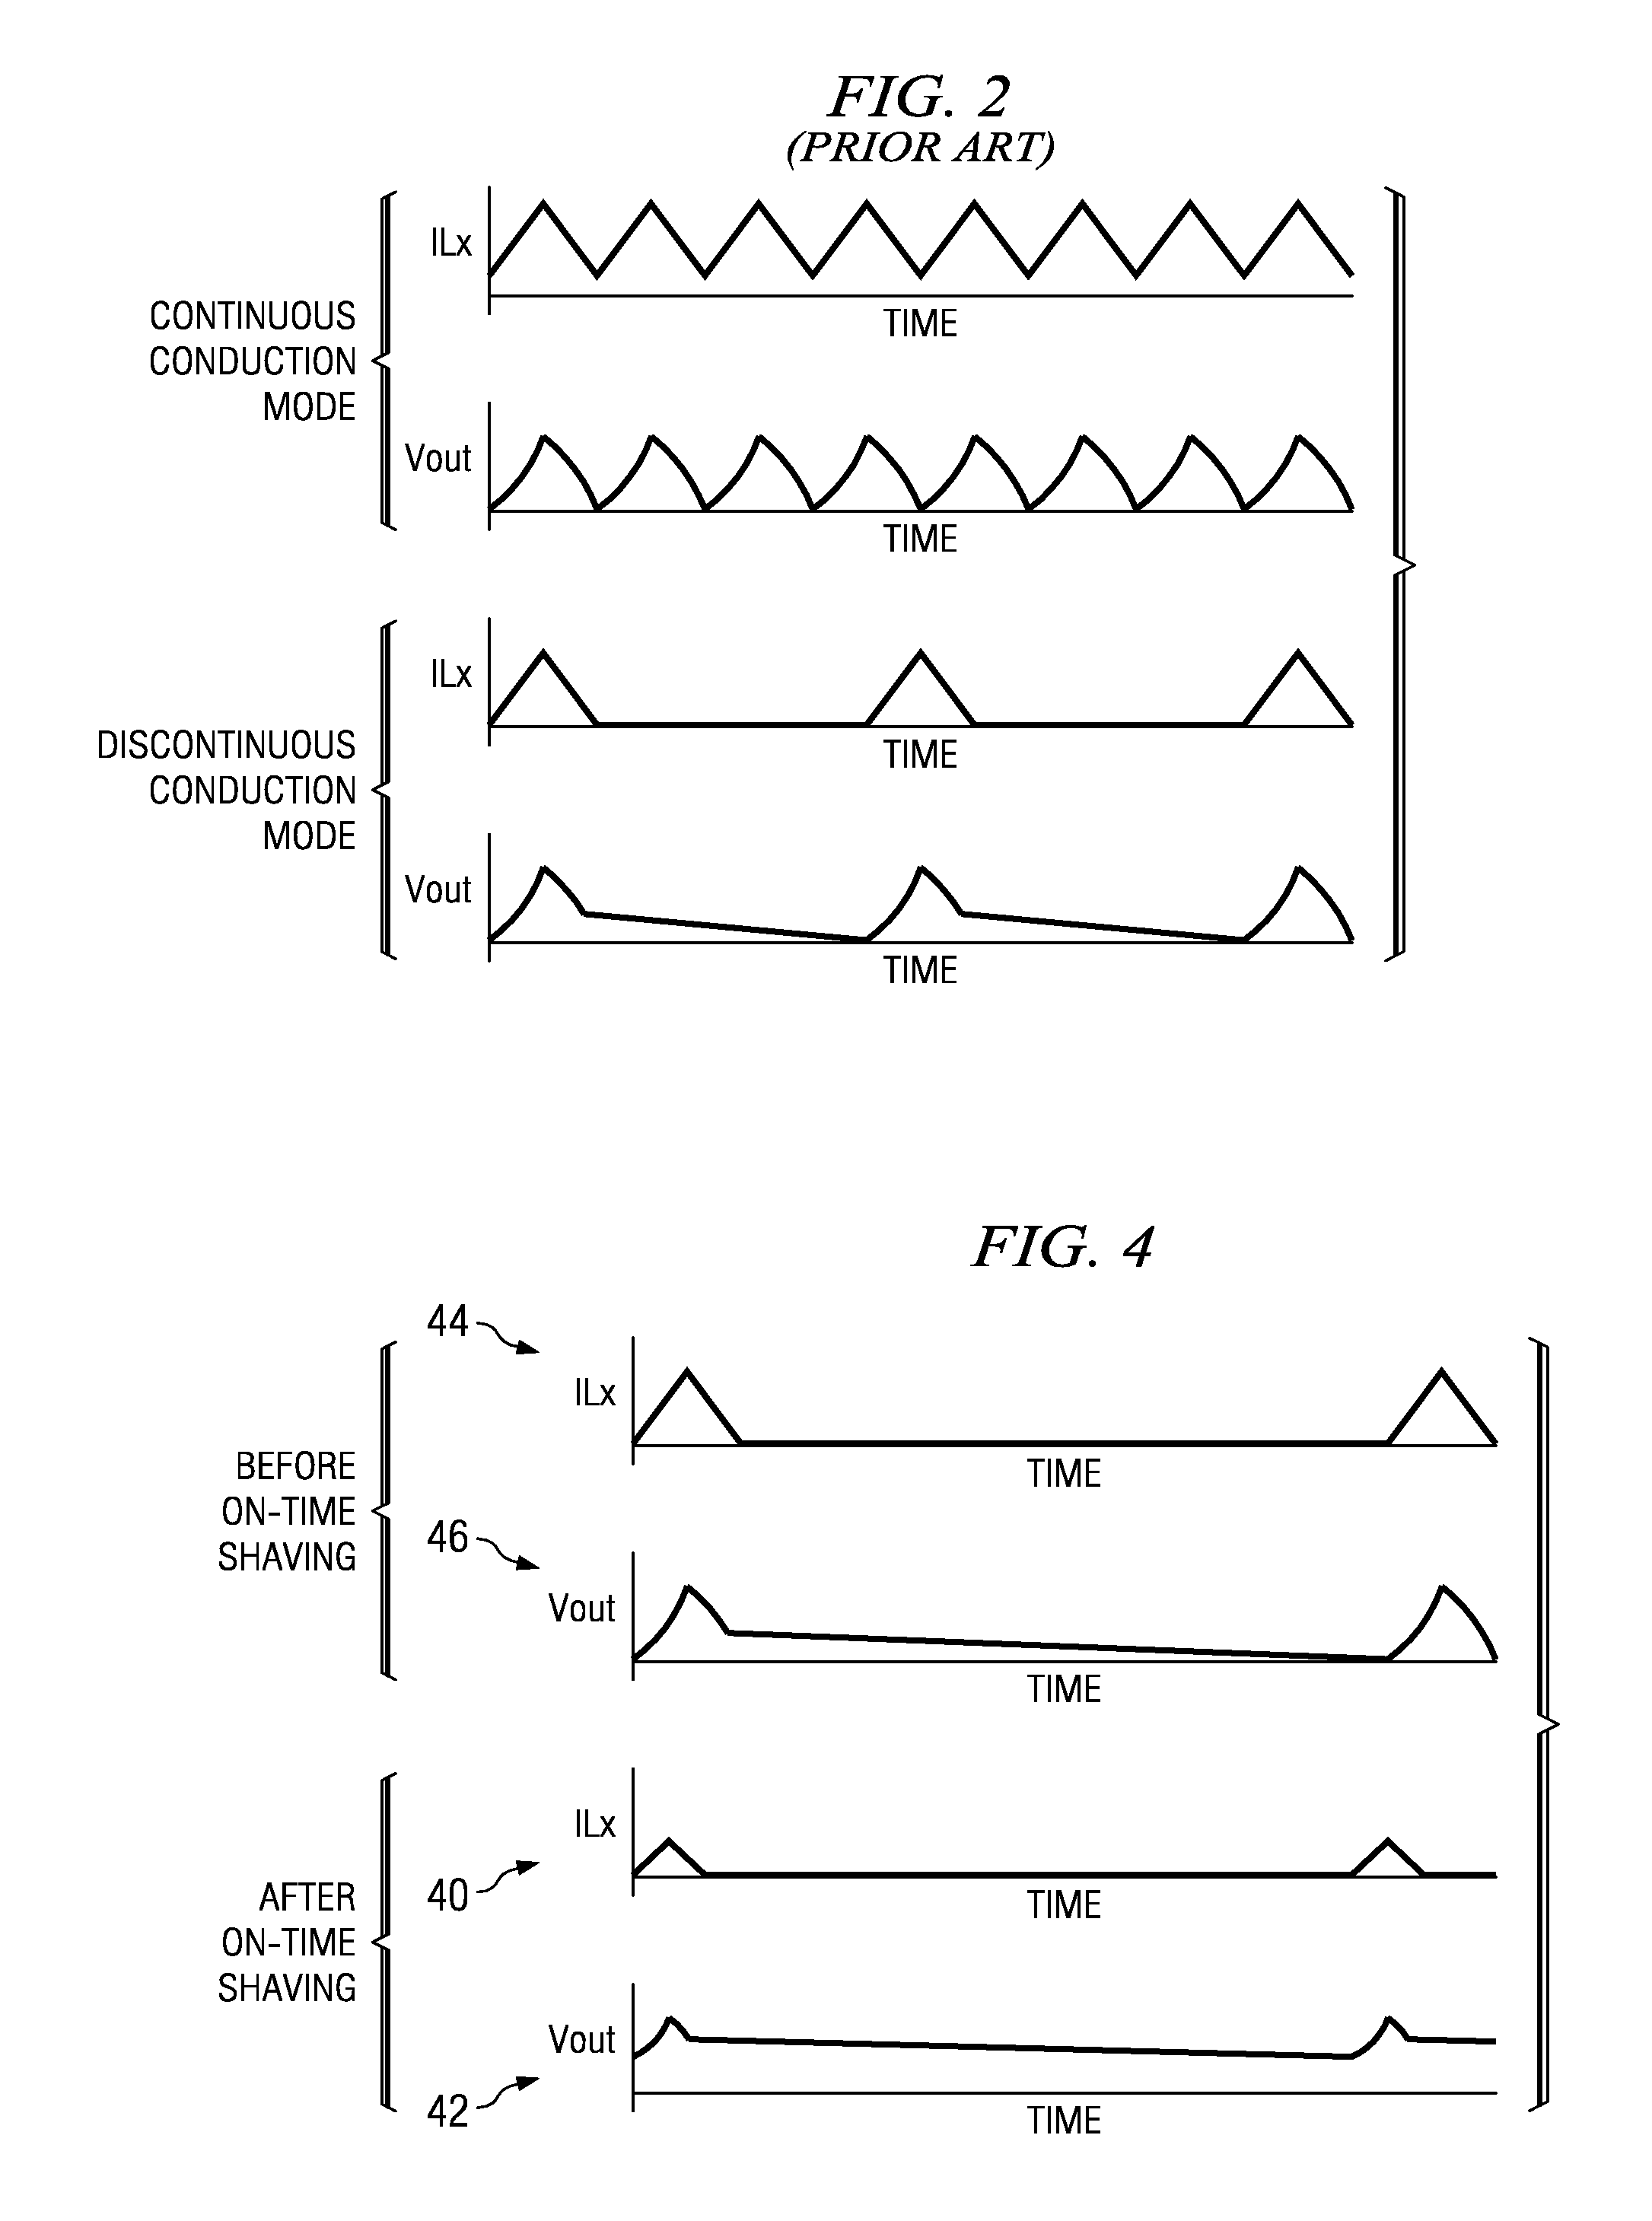 High efficiency power converter operating free of an audible frequency range